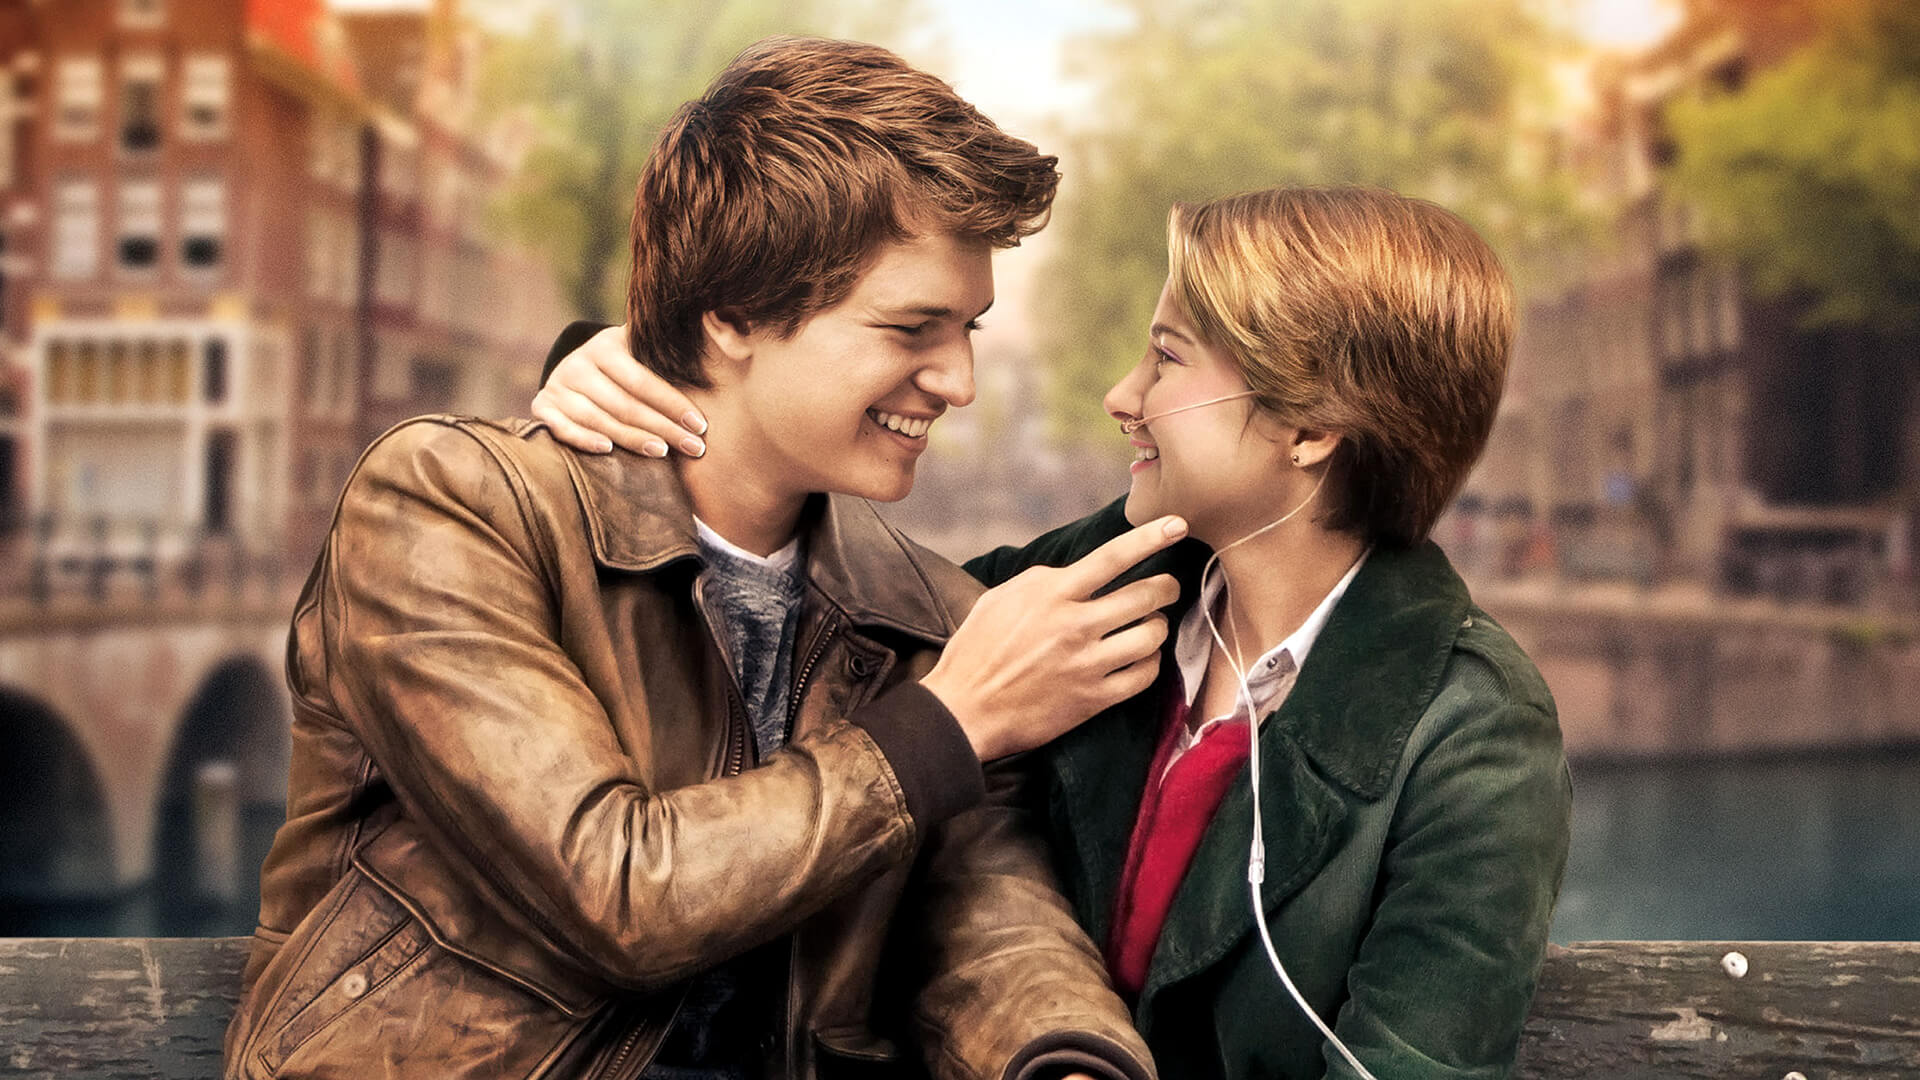 shailene woodley, the fault in our stars, movie, ansel elgort